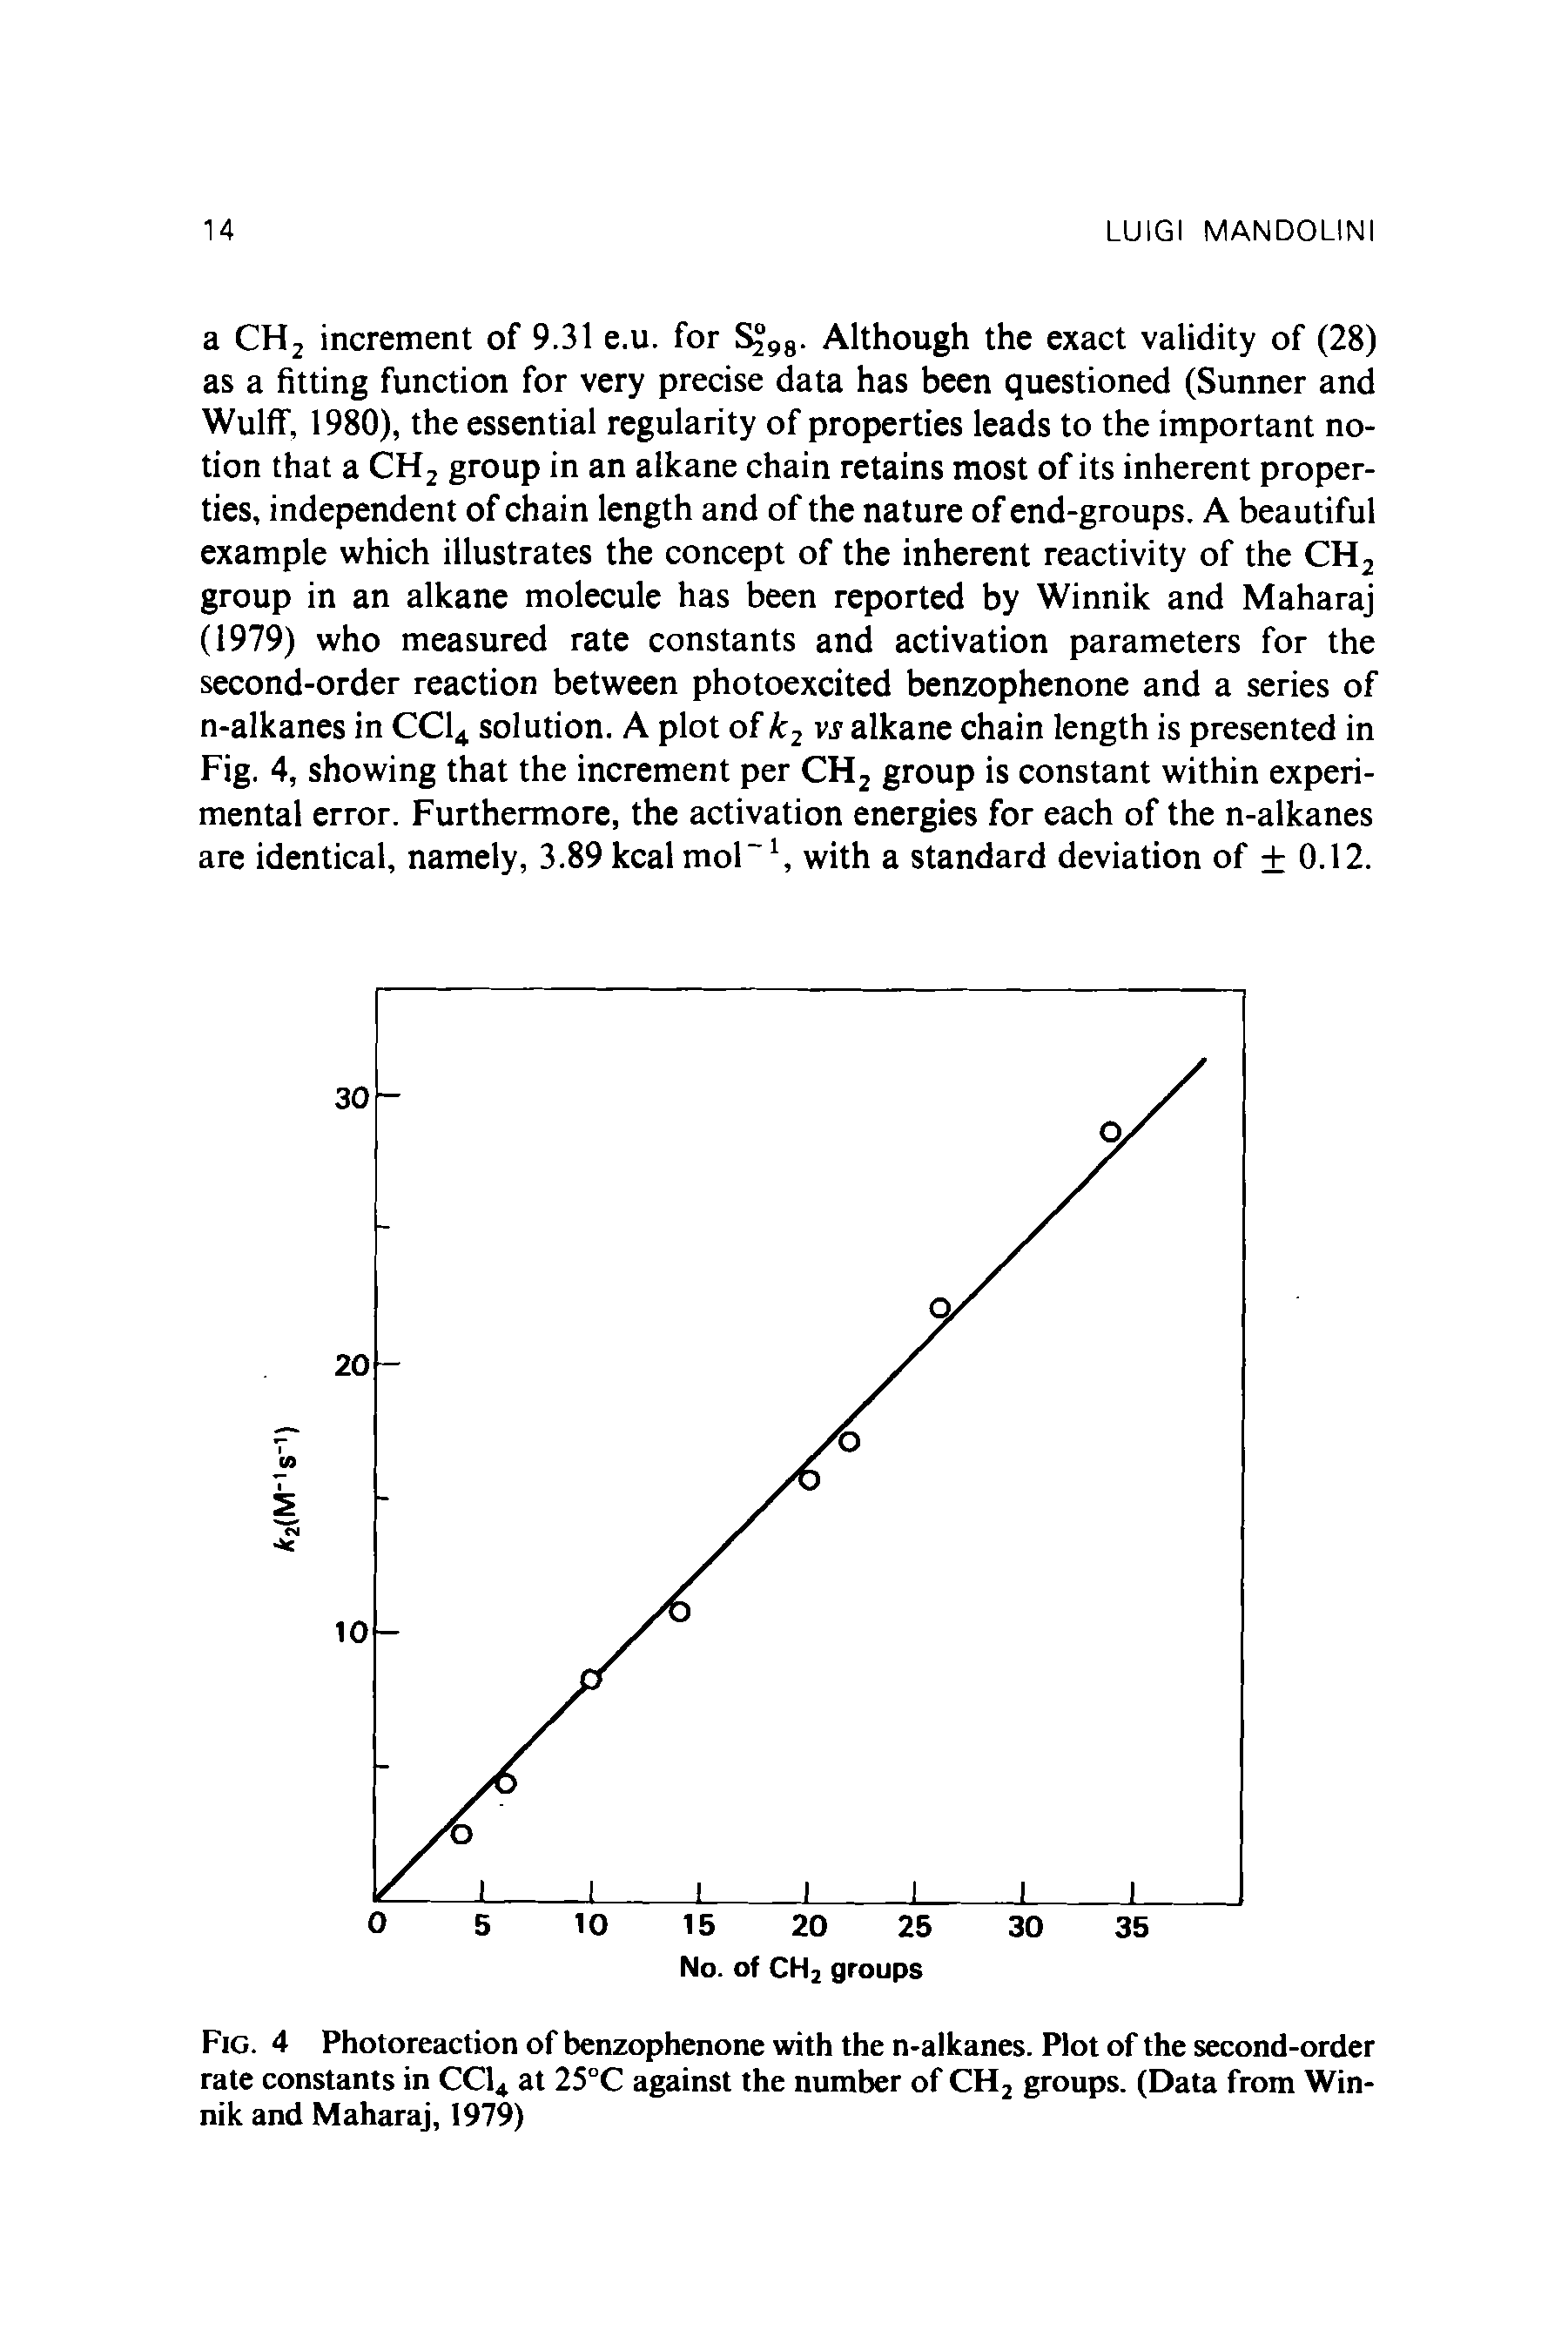 Fig. 4 Photoreaction of benzophenone with the n-alkanes. Plot of the second-order rate constants in CC14 at 25°C against the number of CH2 groups. (Data from Winnik and Maharaj, 1979)...